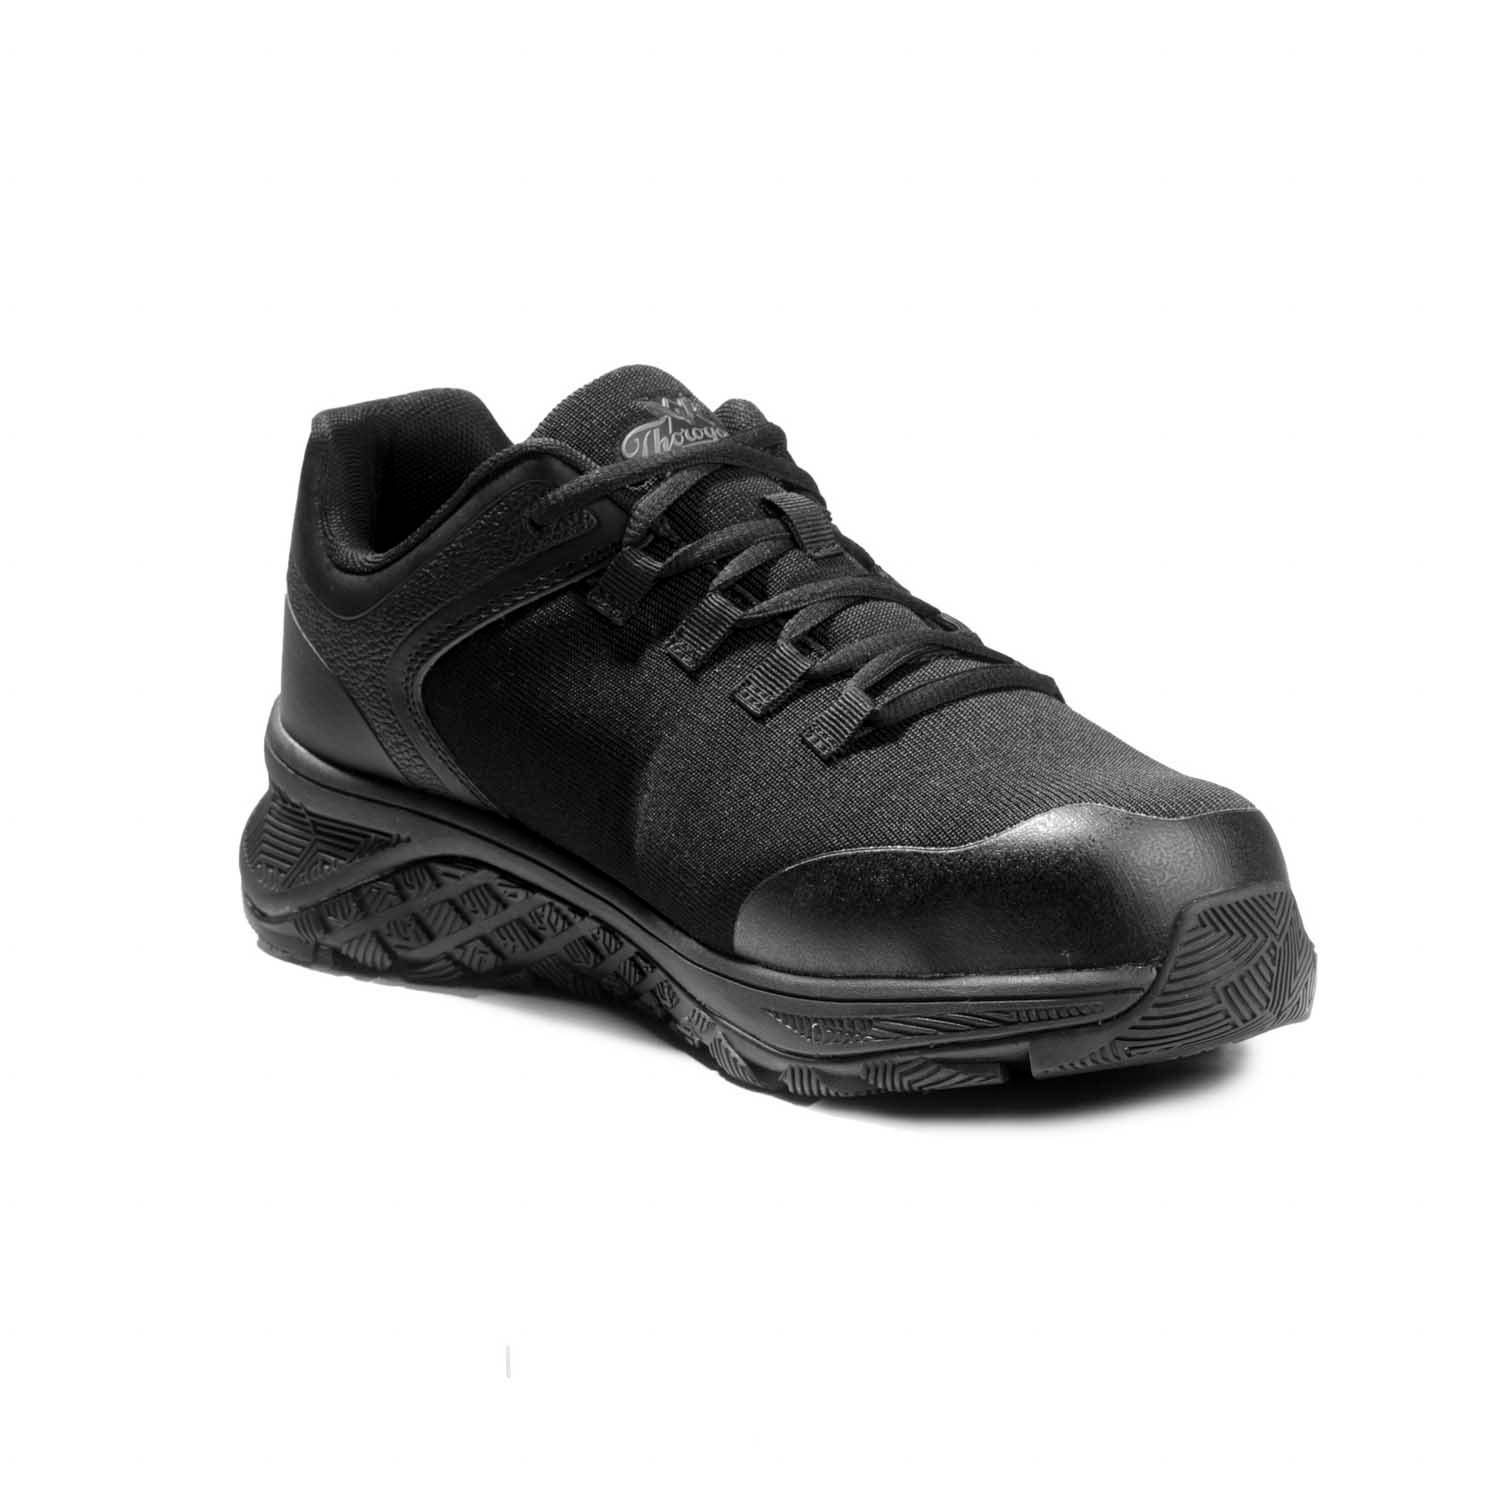 Thorogood T800 Low Composite Toe Oxfords